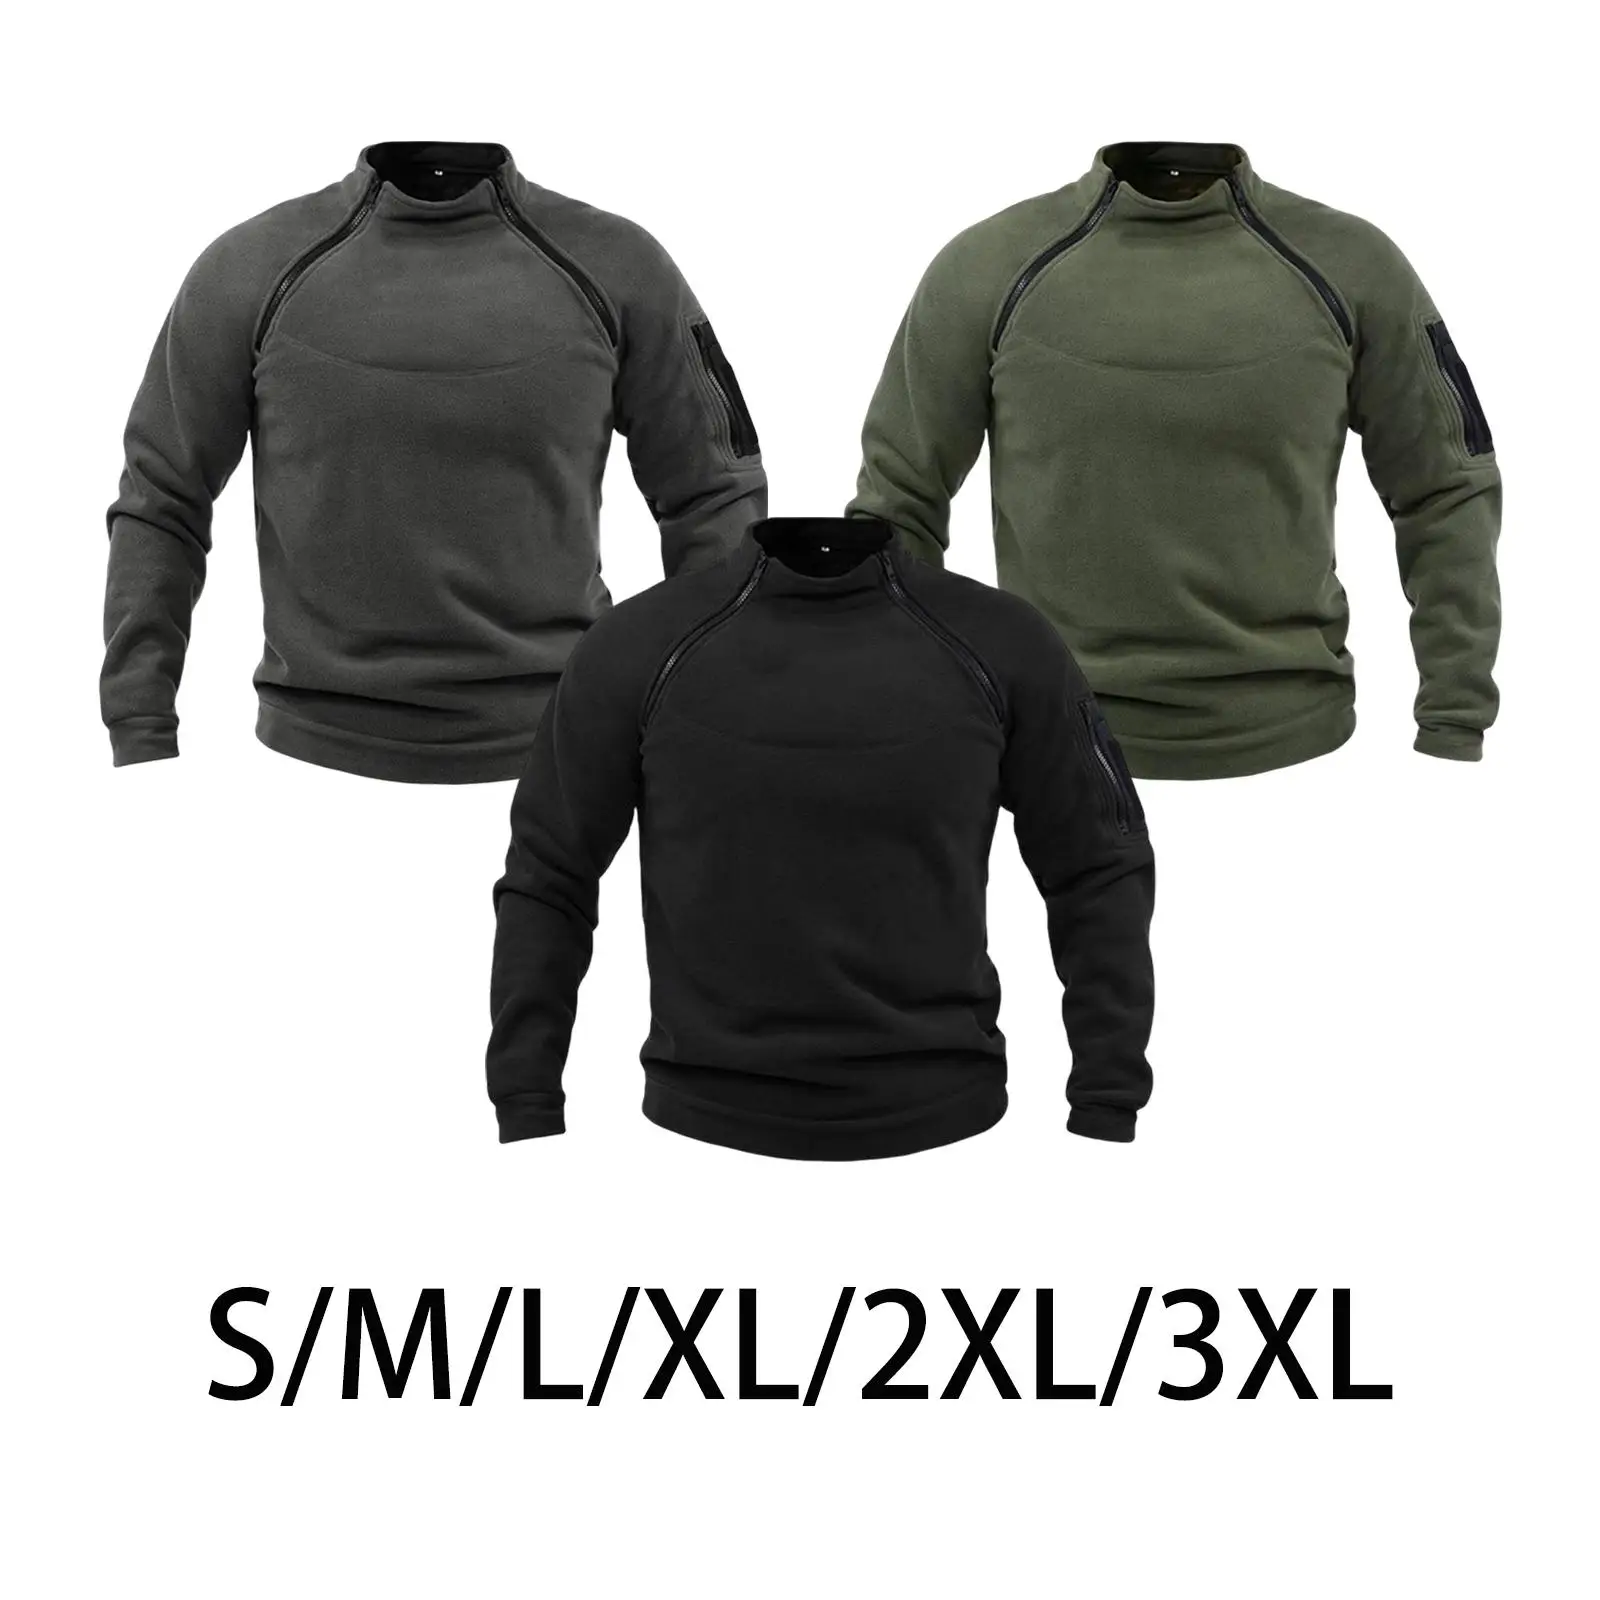 Men Jacket Zipper Pullover Casual Autumn Winter Breathable Sweatshirt Warm Coat Long Sleeve for Cycling Fishing Travel